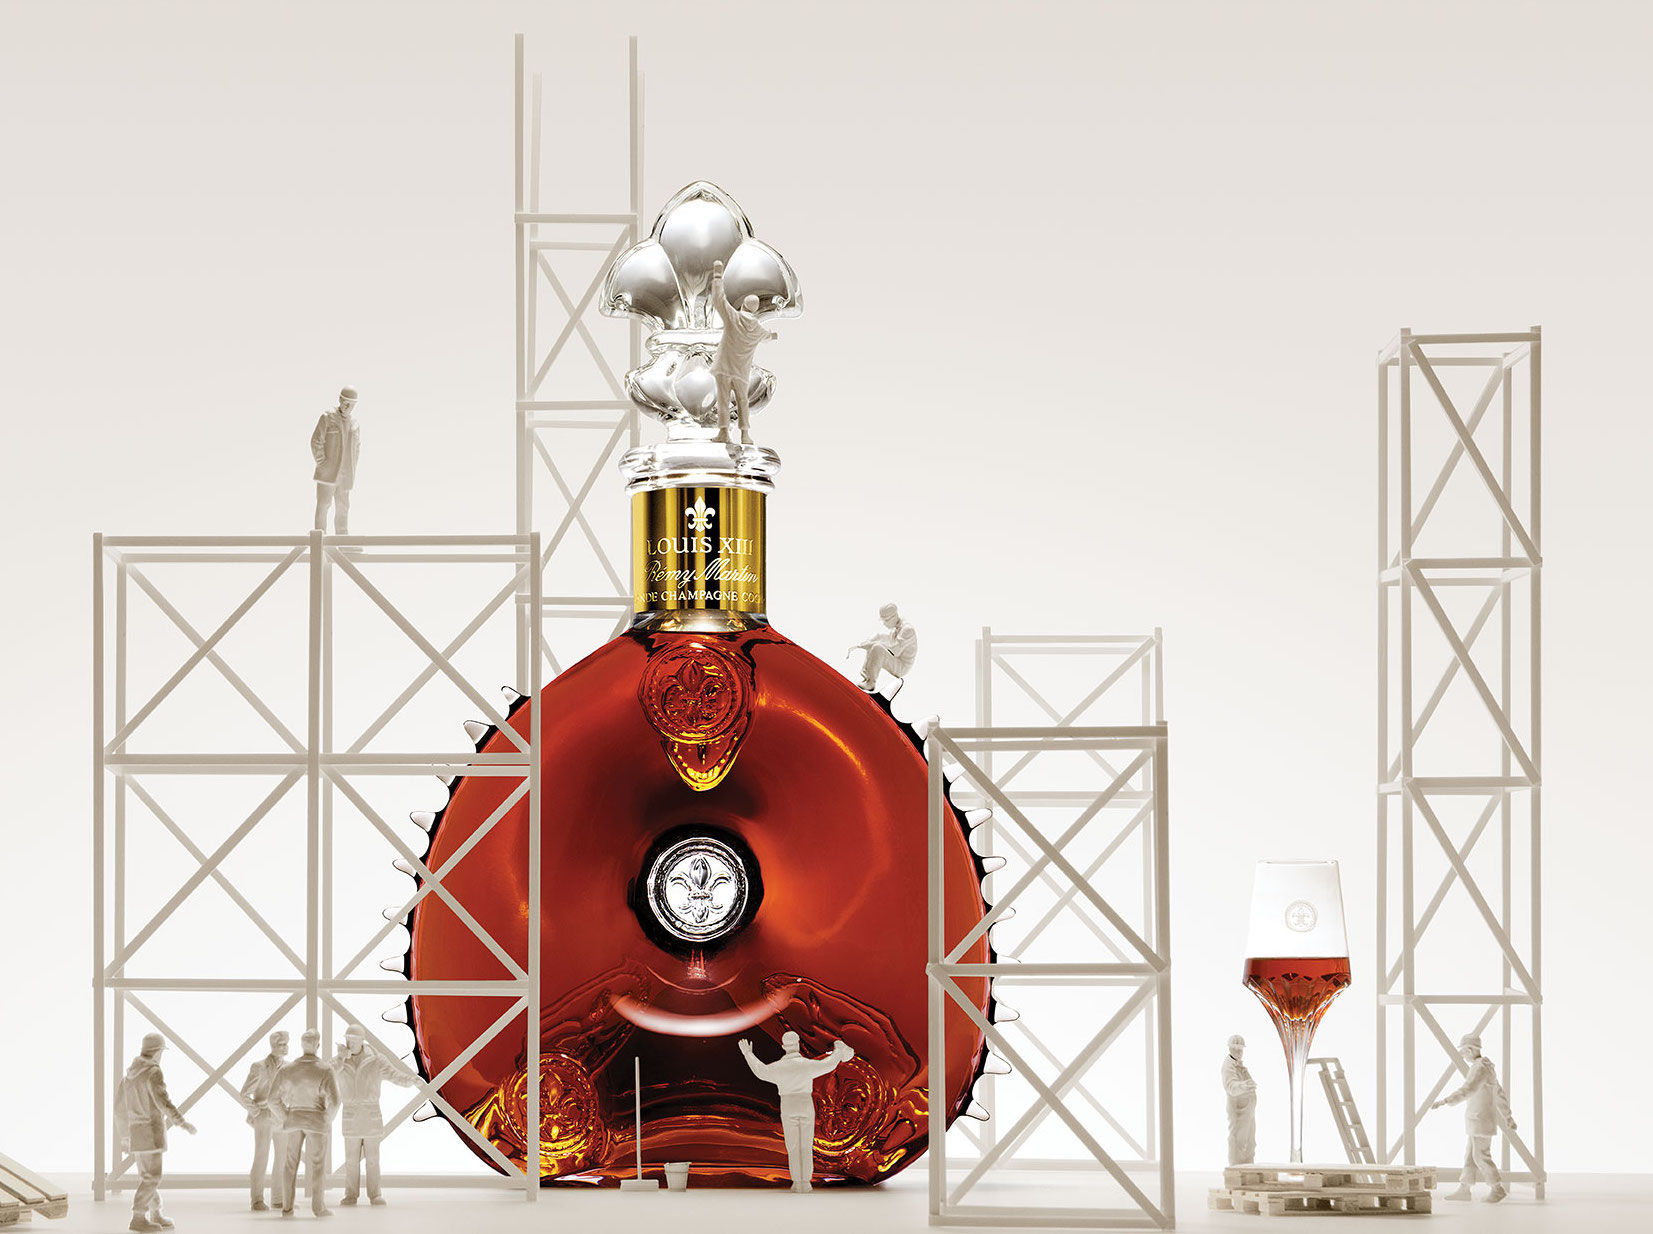 The Louis XIII Le Mathusalem is a six-litre crystal decanter of cognac worth S$123,000